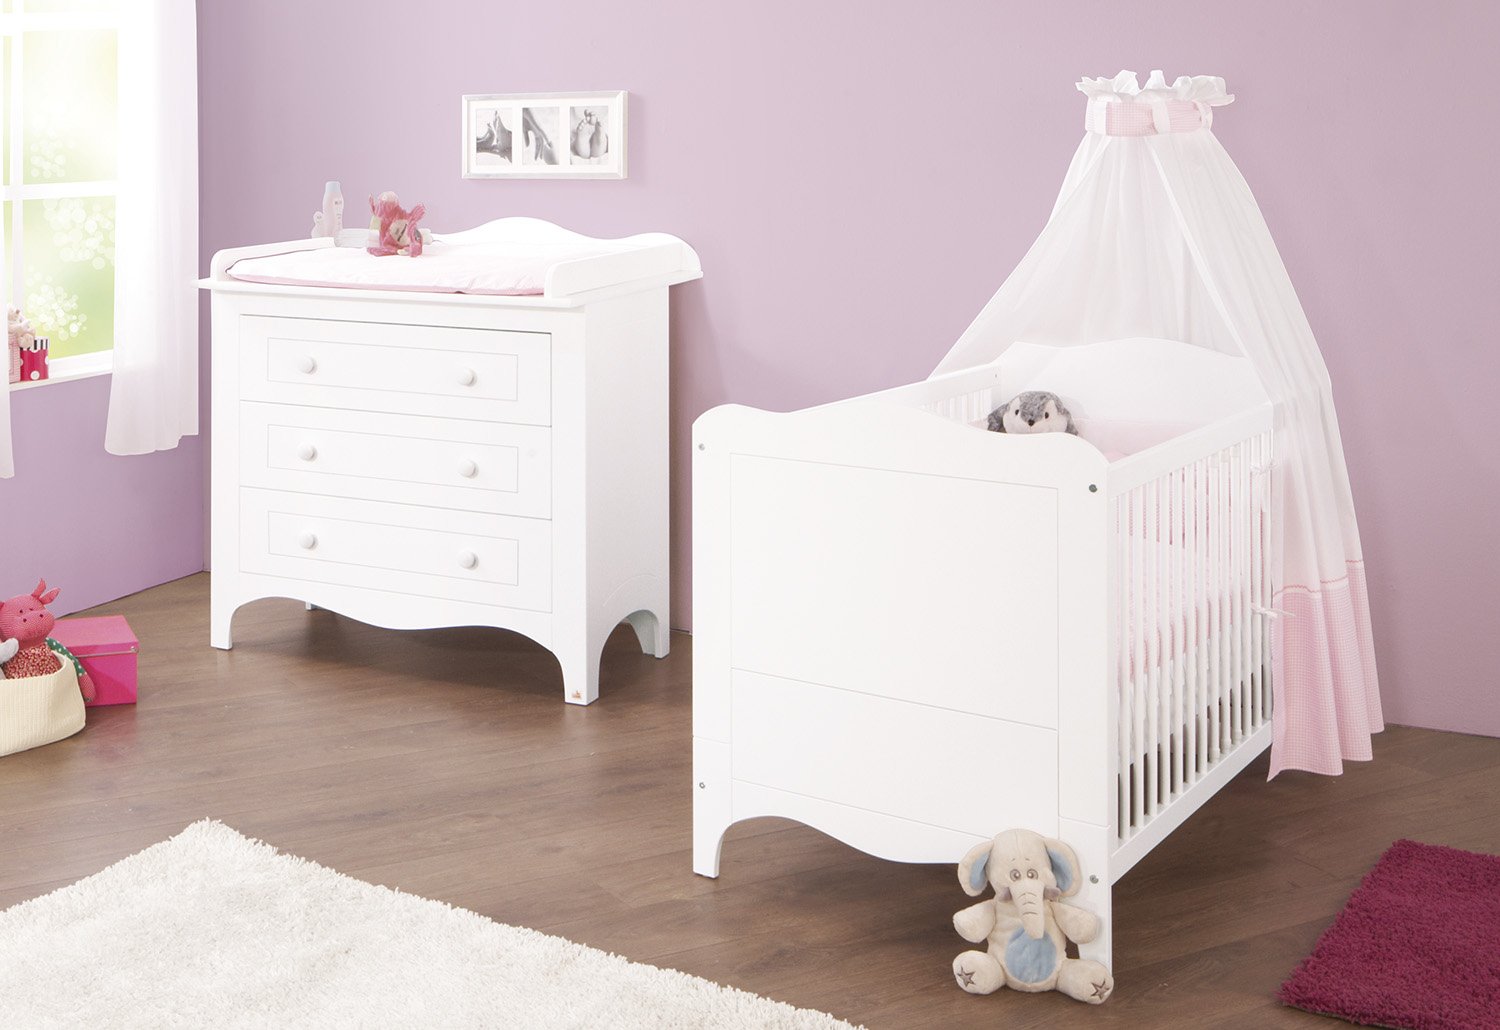 Pinolino Set Fleur Broad, 2-Piece, Cot Bed (140 x 70 cm) and Wide Changing Table with Nappy Changing Table Matt White Stainless (Item No. 09 34 72 W)